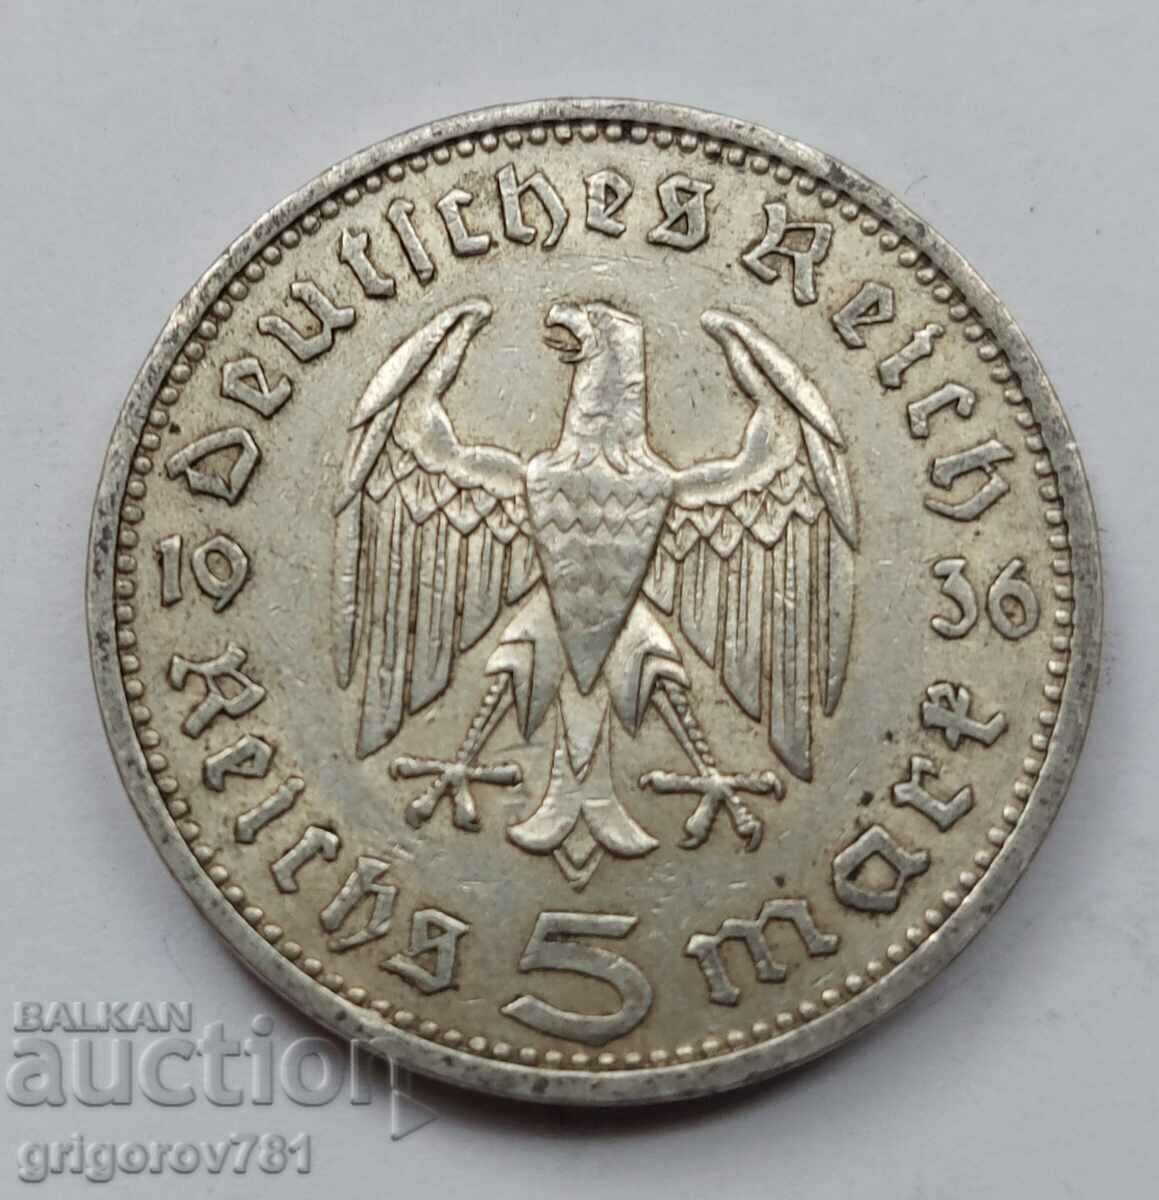 5 Mark Silver Germany 1936 A III Reich Silver Coin #54